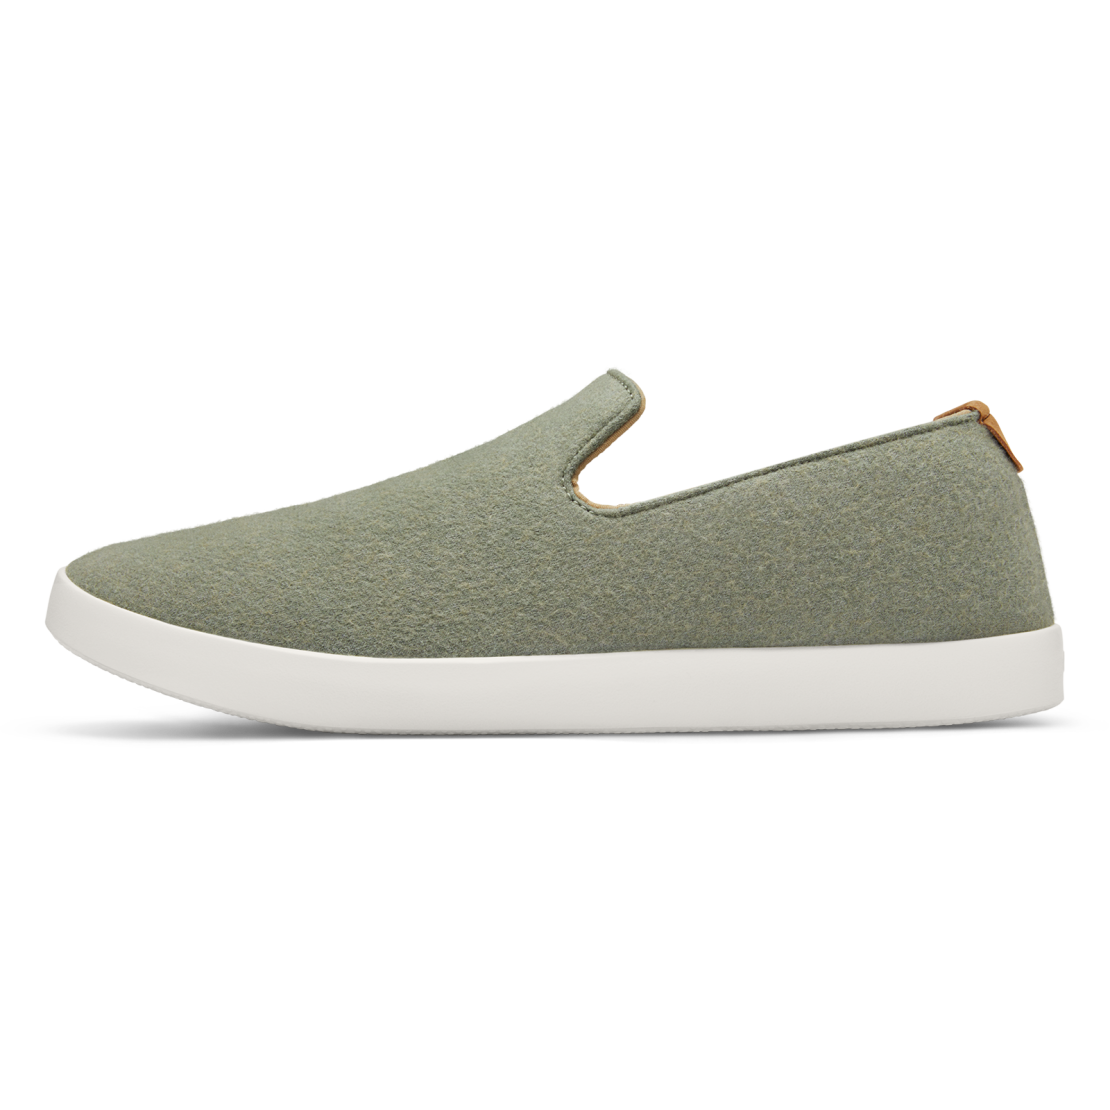 Men's Wool Loungers - Hazy Pine (Natural White Sole)